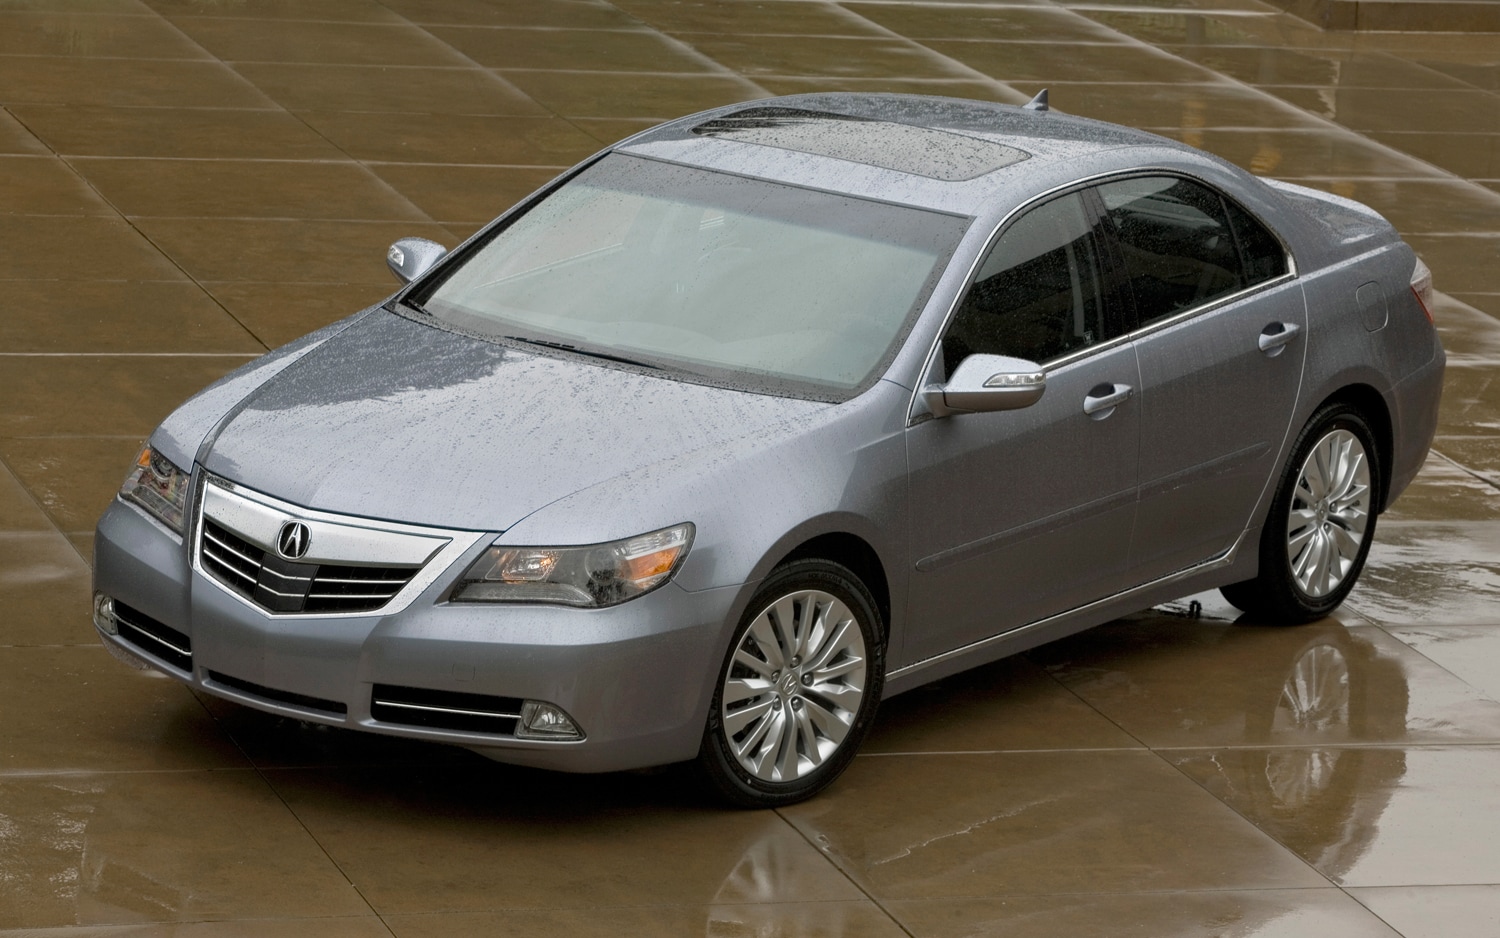 2012 Acura RL Last Drive - What the 2014 RLX Can Learn from its Predecessor